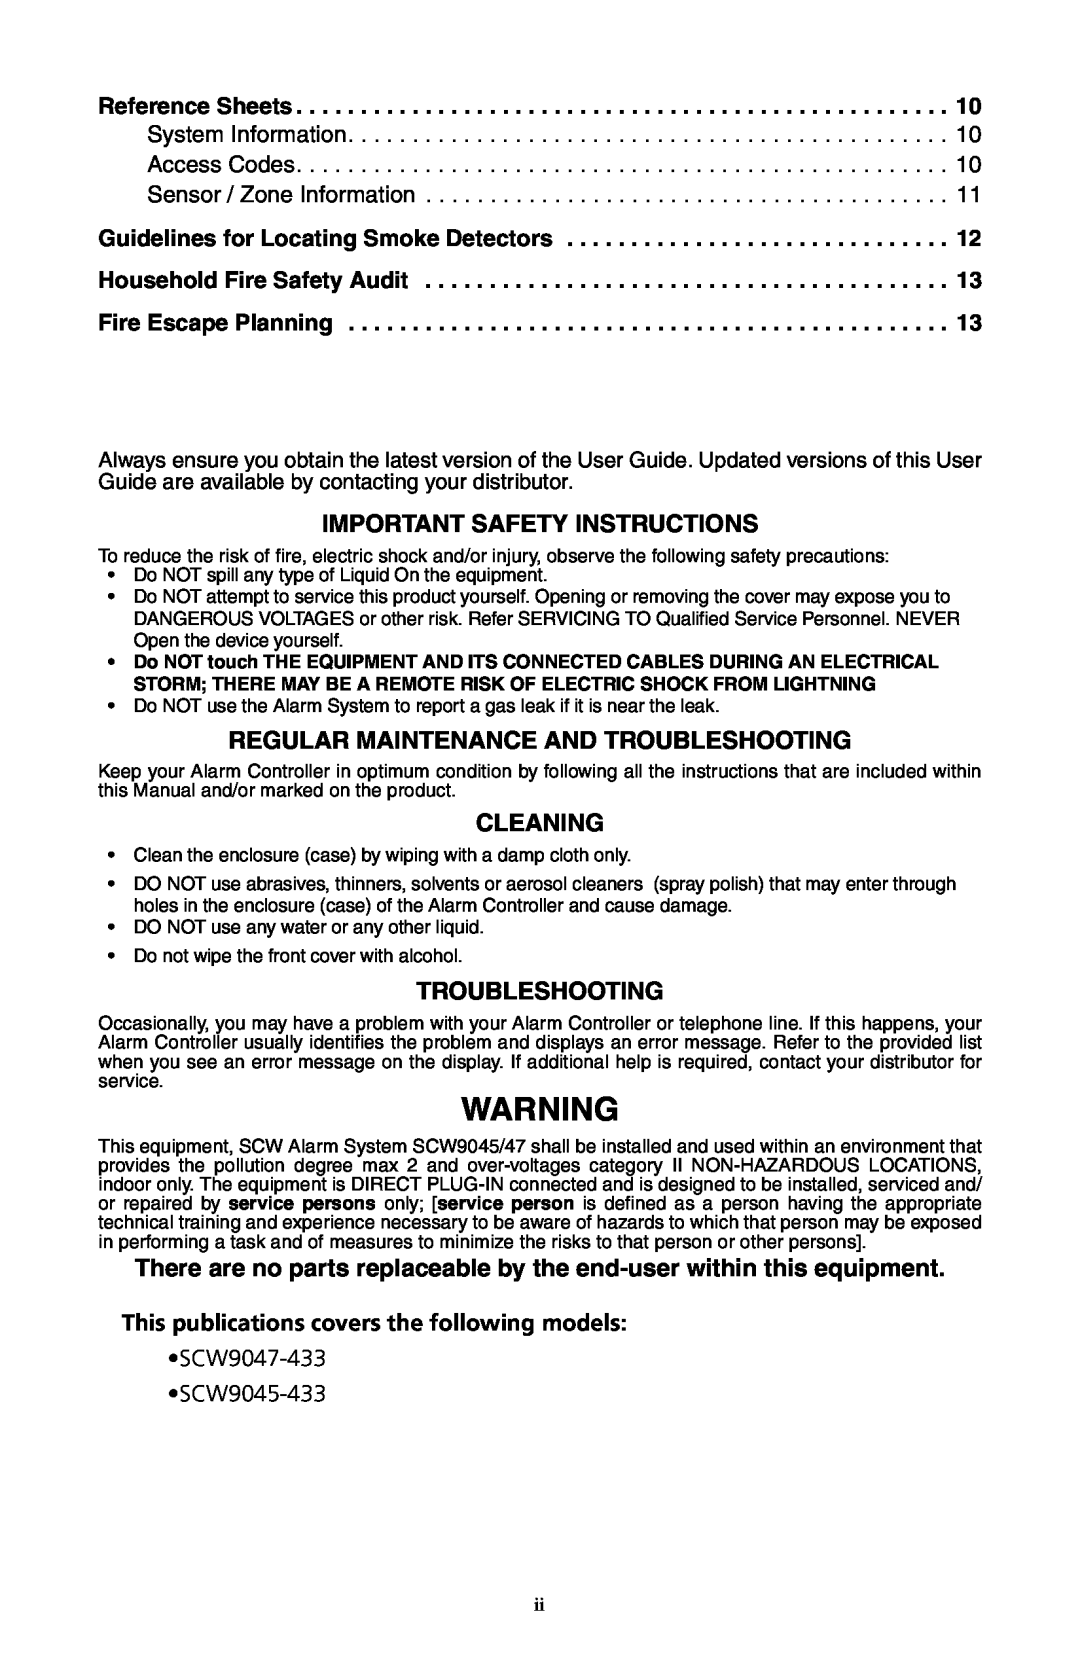 ADT Security Services SCW9045-433 manual Important Safety Instructions, Regular Maintenance And Troubleshooting, Cleaning 